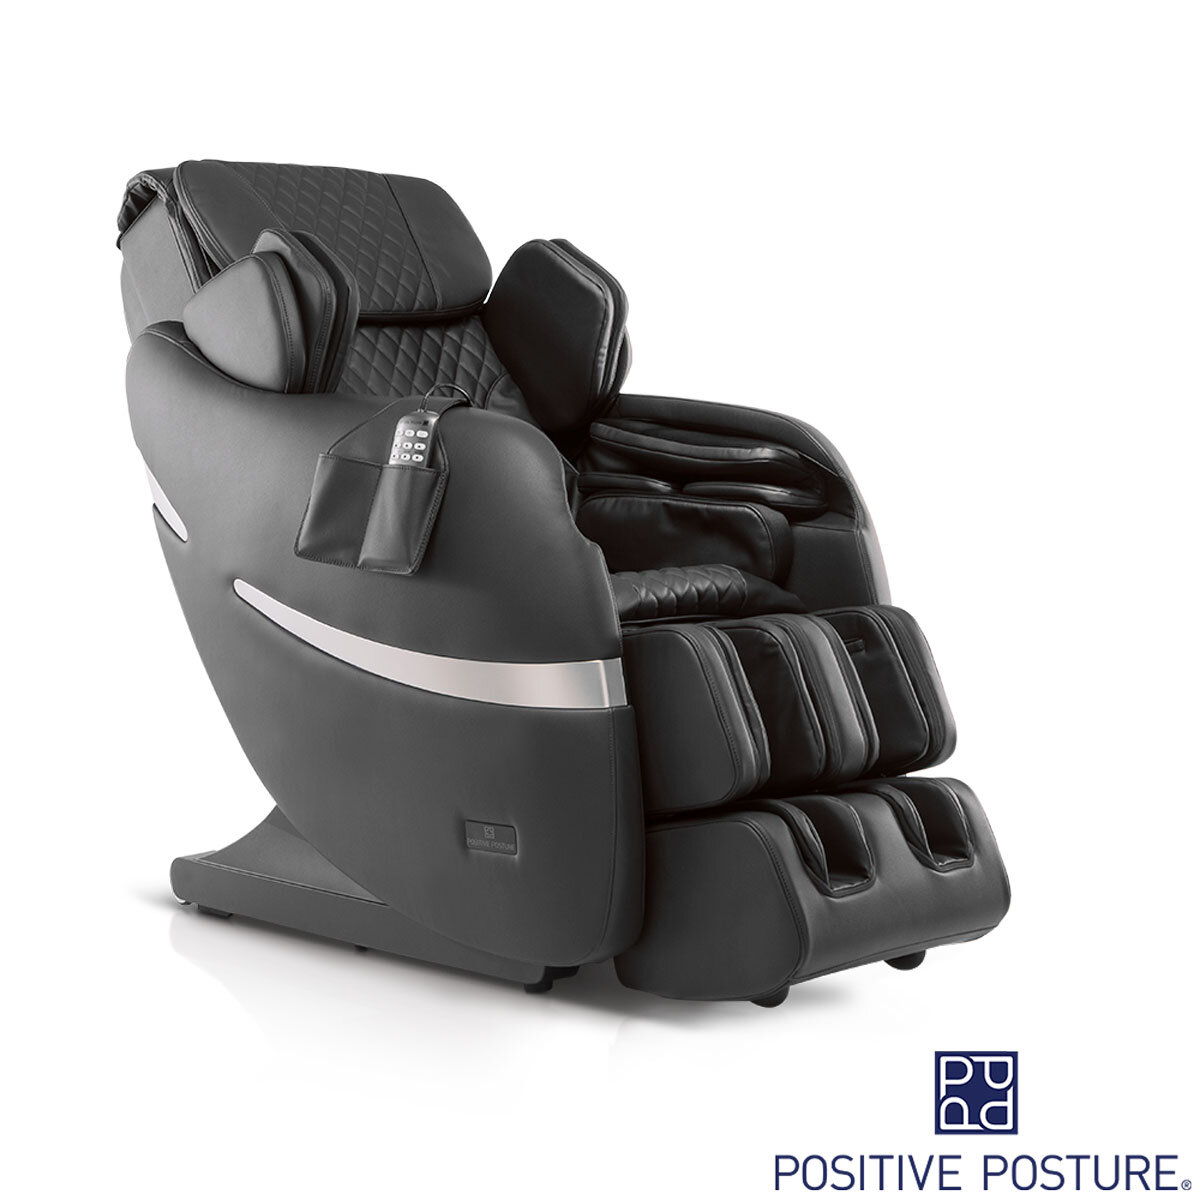 Image of Brio+ Massage Chair Black from 45 degree angle